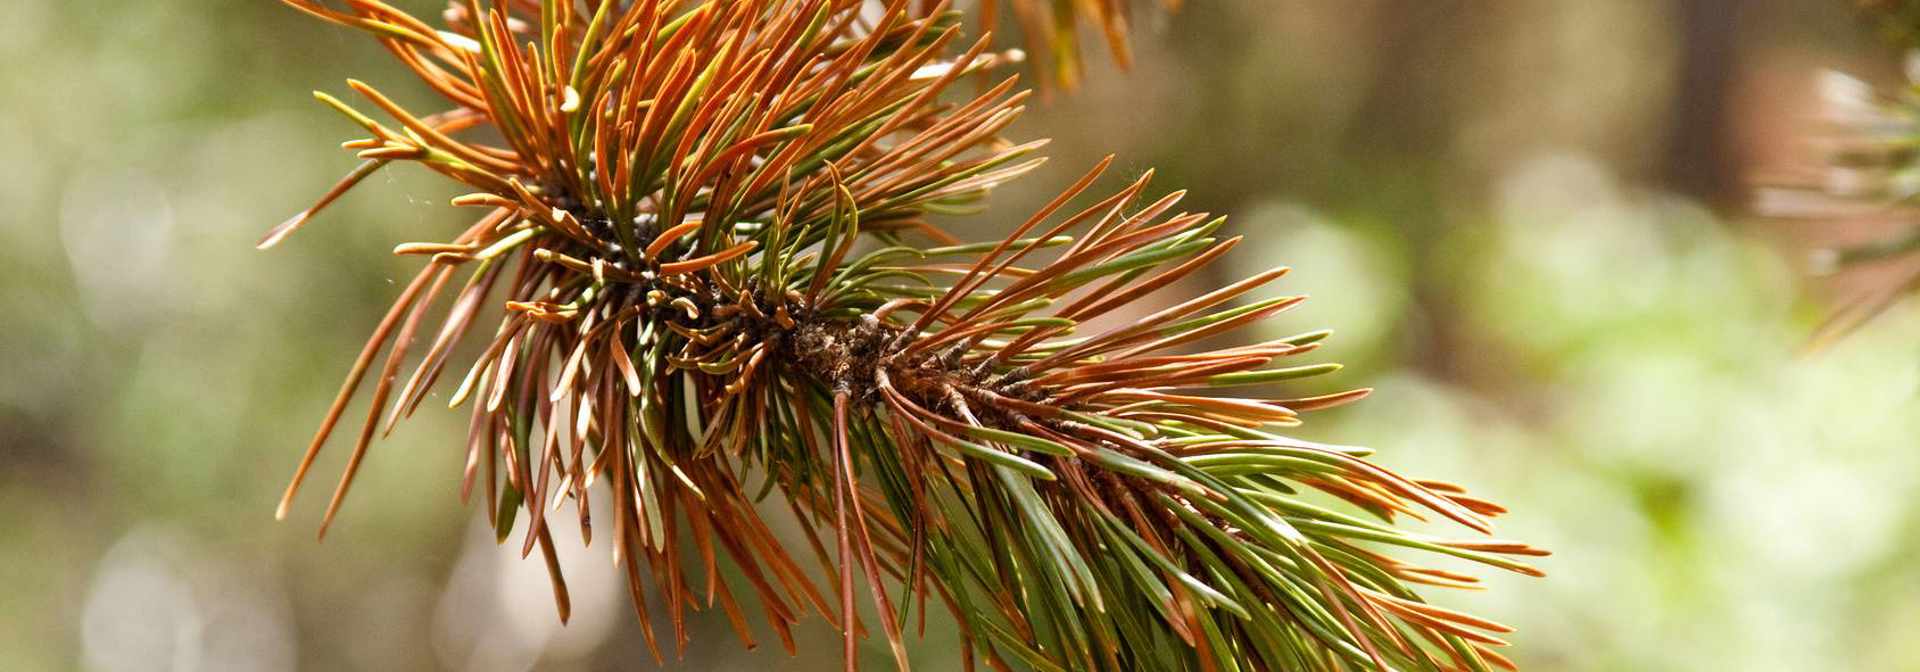 Brown Needles On Evergreen Pine Or Spruce Tree